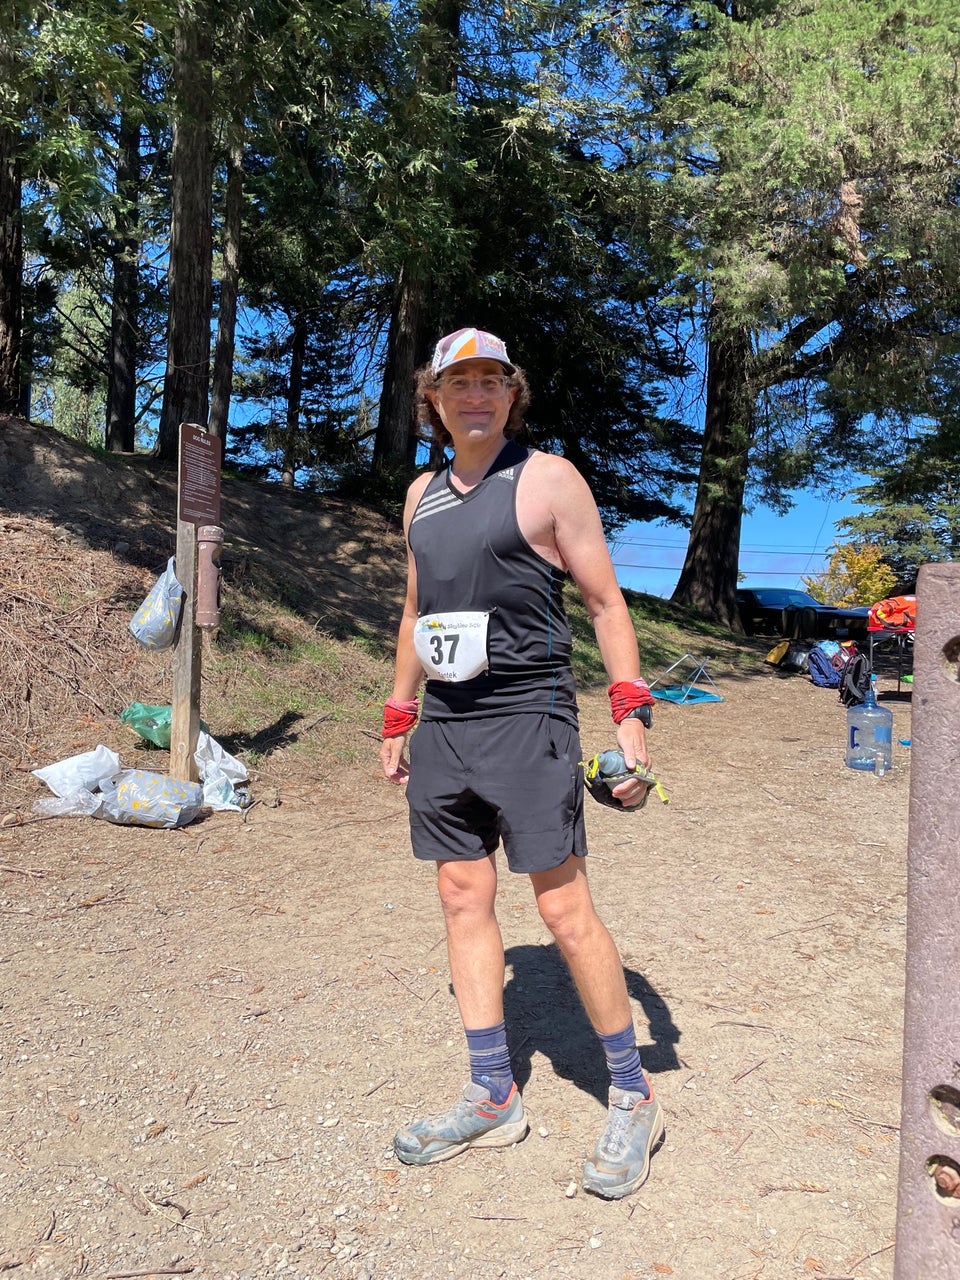 Tantek standing at an angle on a wide trail in bright sunshine with pine trees behind him, holding his water bottle, leaning forward on his right foot, head turned slightly to face the camera and smile.